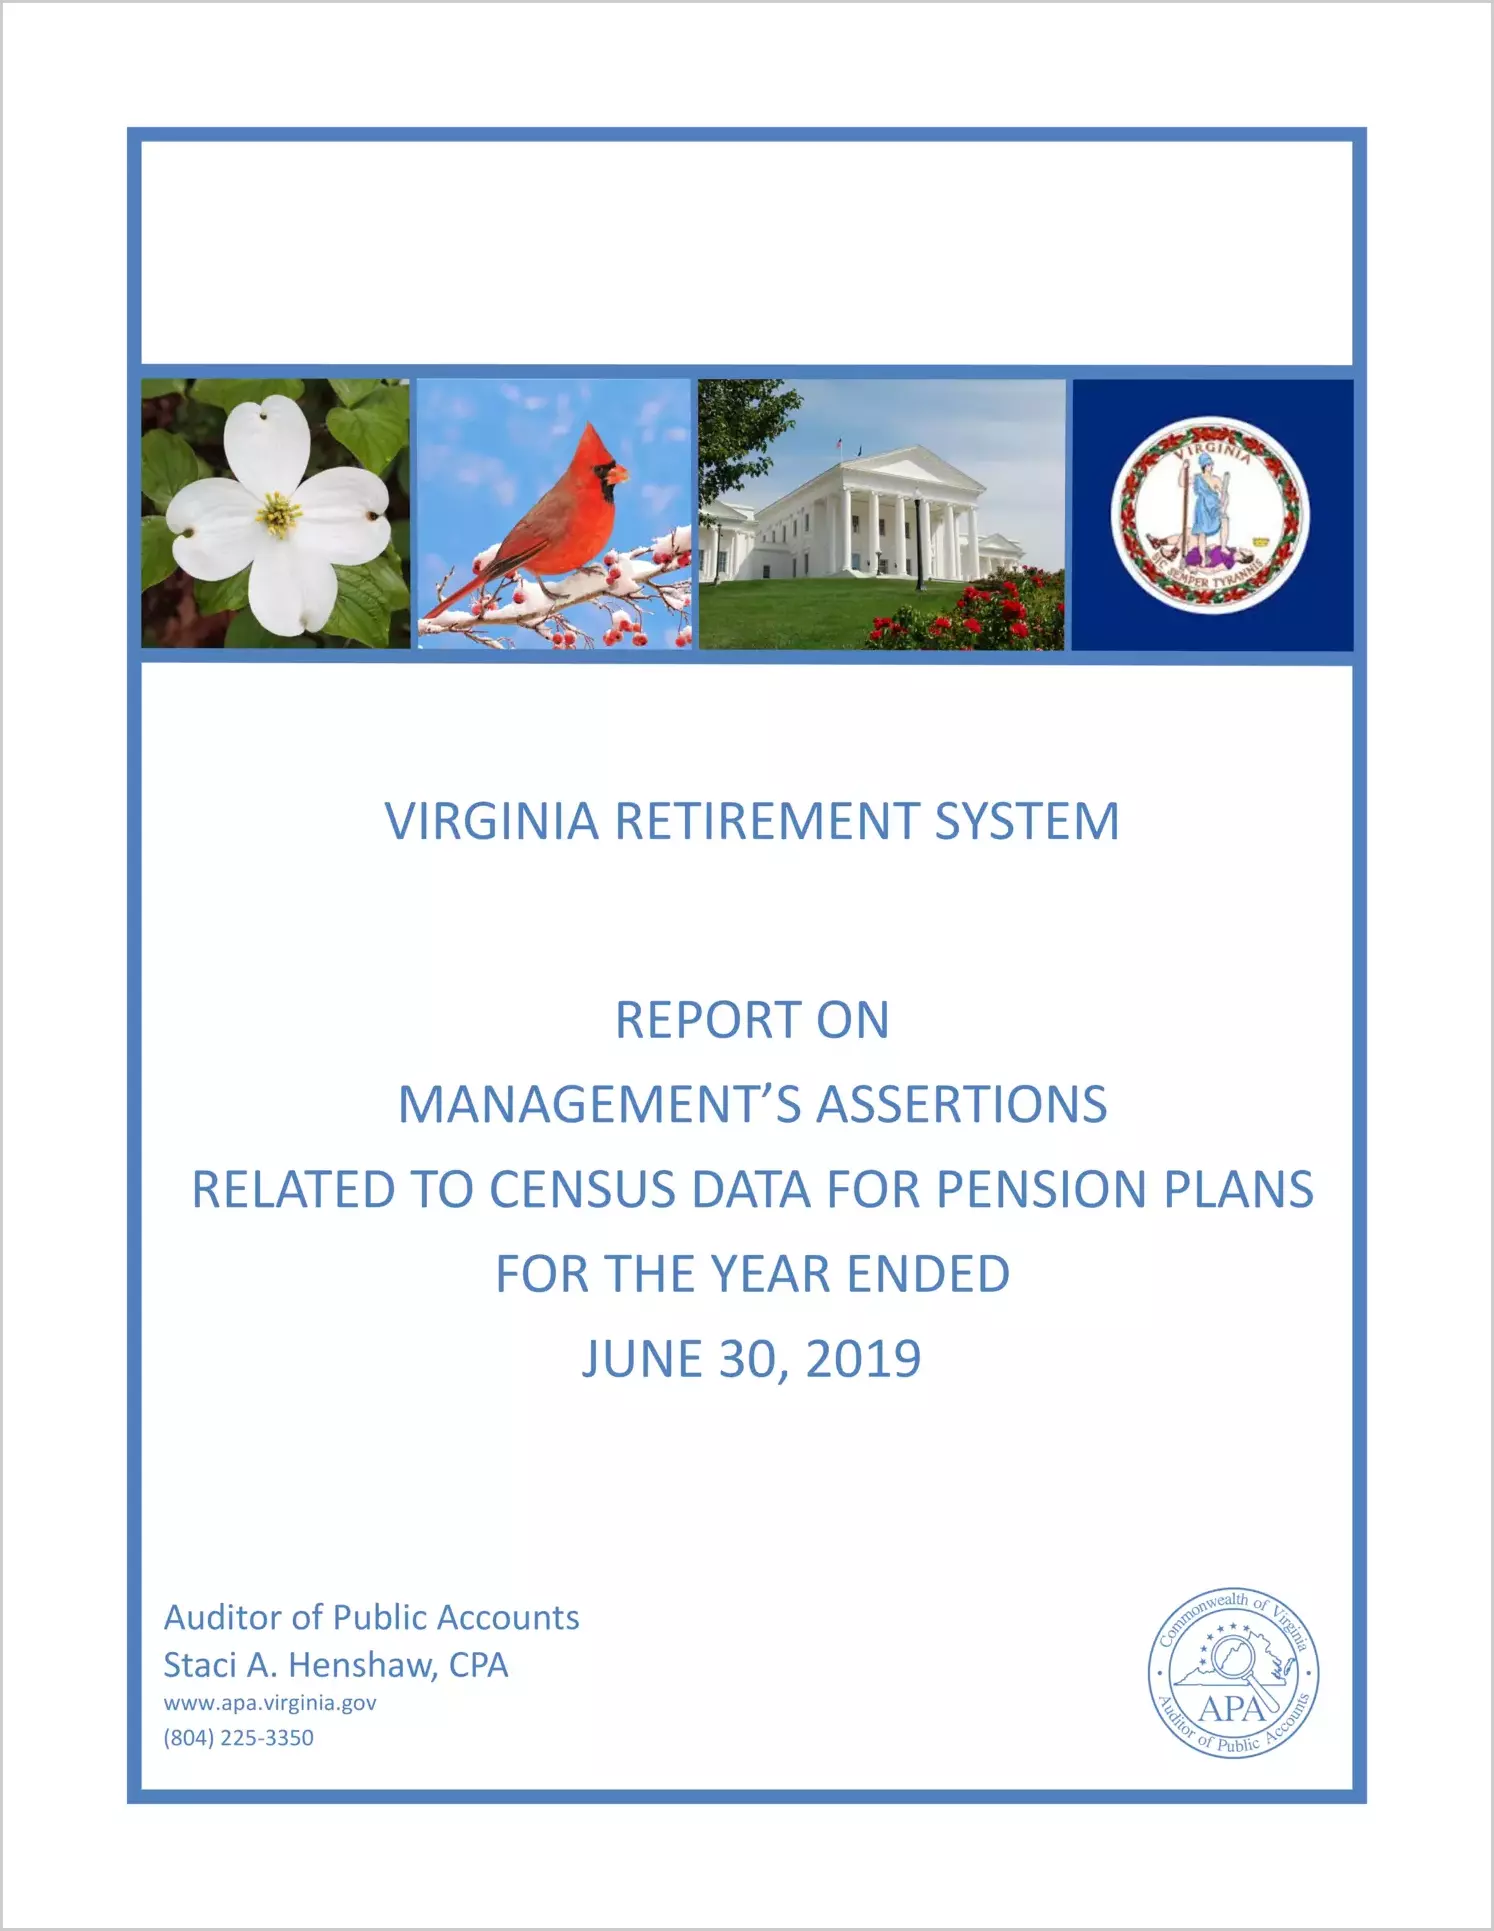 Virginia Retirement System Management's Assertions Related to Census Data for Pension Plans for the year ended June 30, 2019